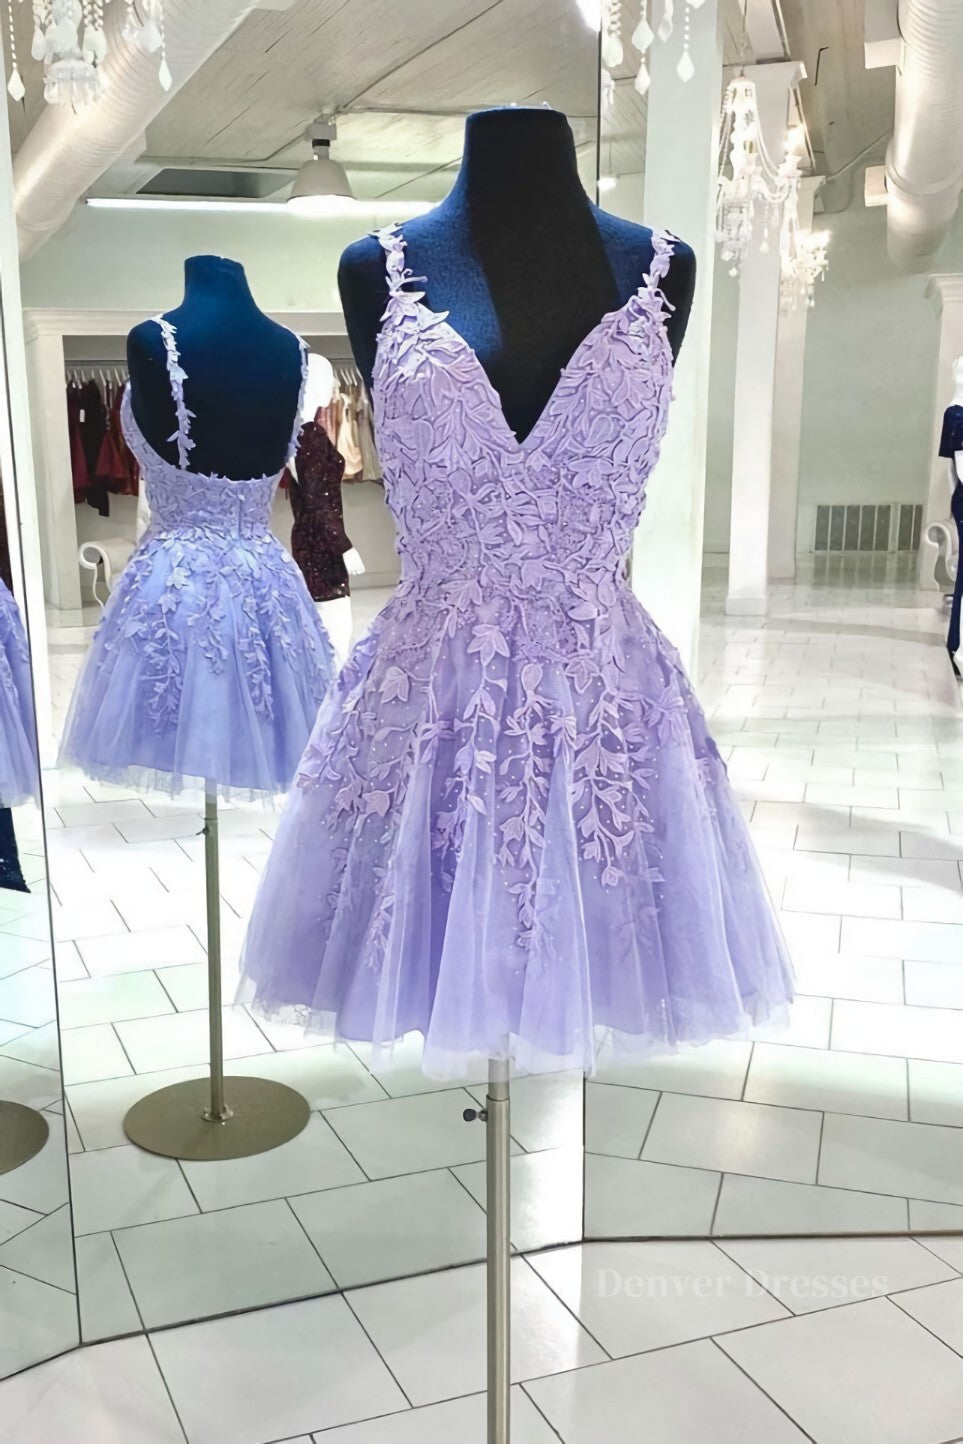 Formal Dresses To Wear To A Wedding, Purple v neck tulle lace short prom dress lace cocktail dress